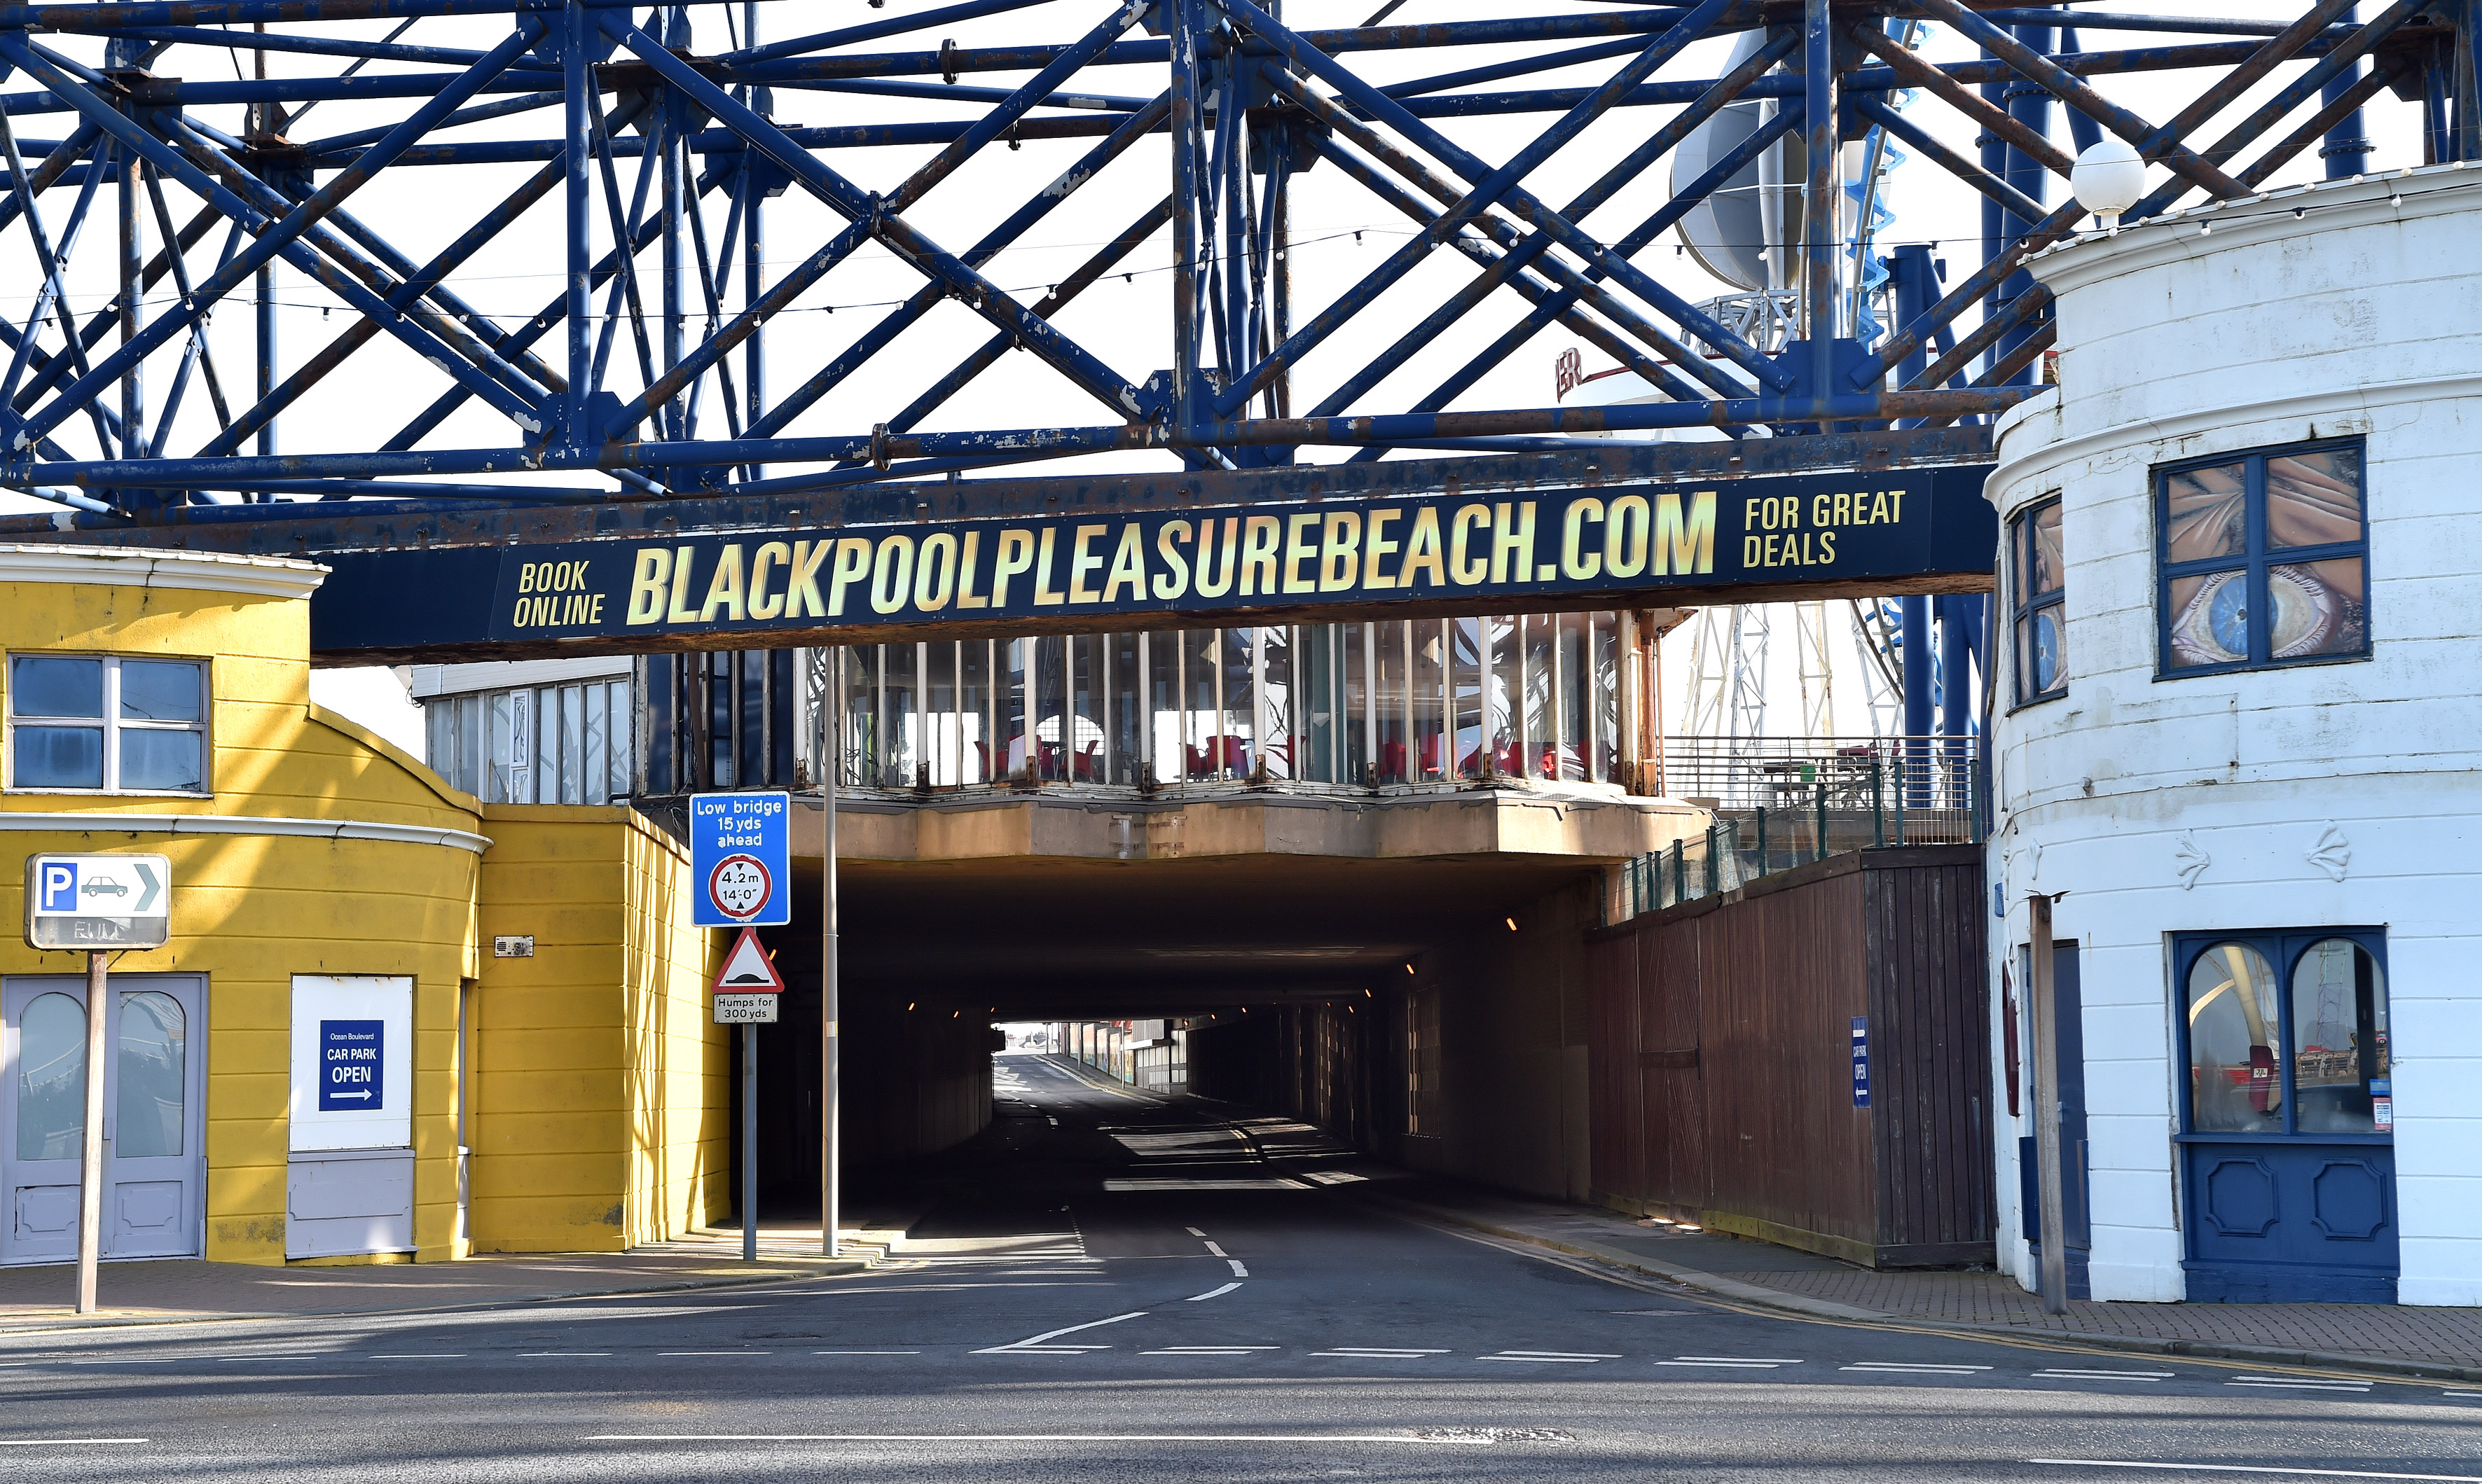 The iconic Blackpool Pleasure Beach has been open since 1896